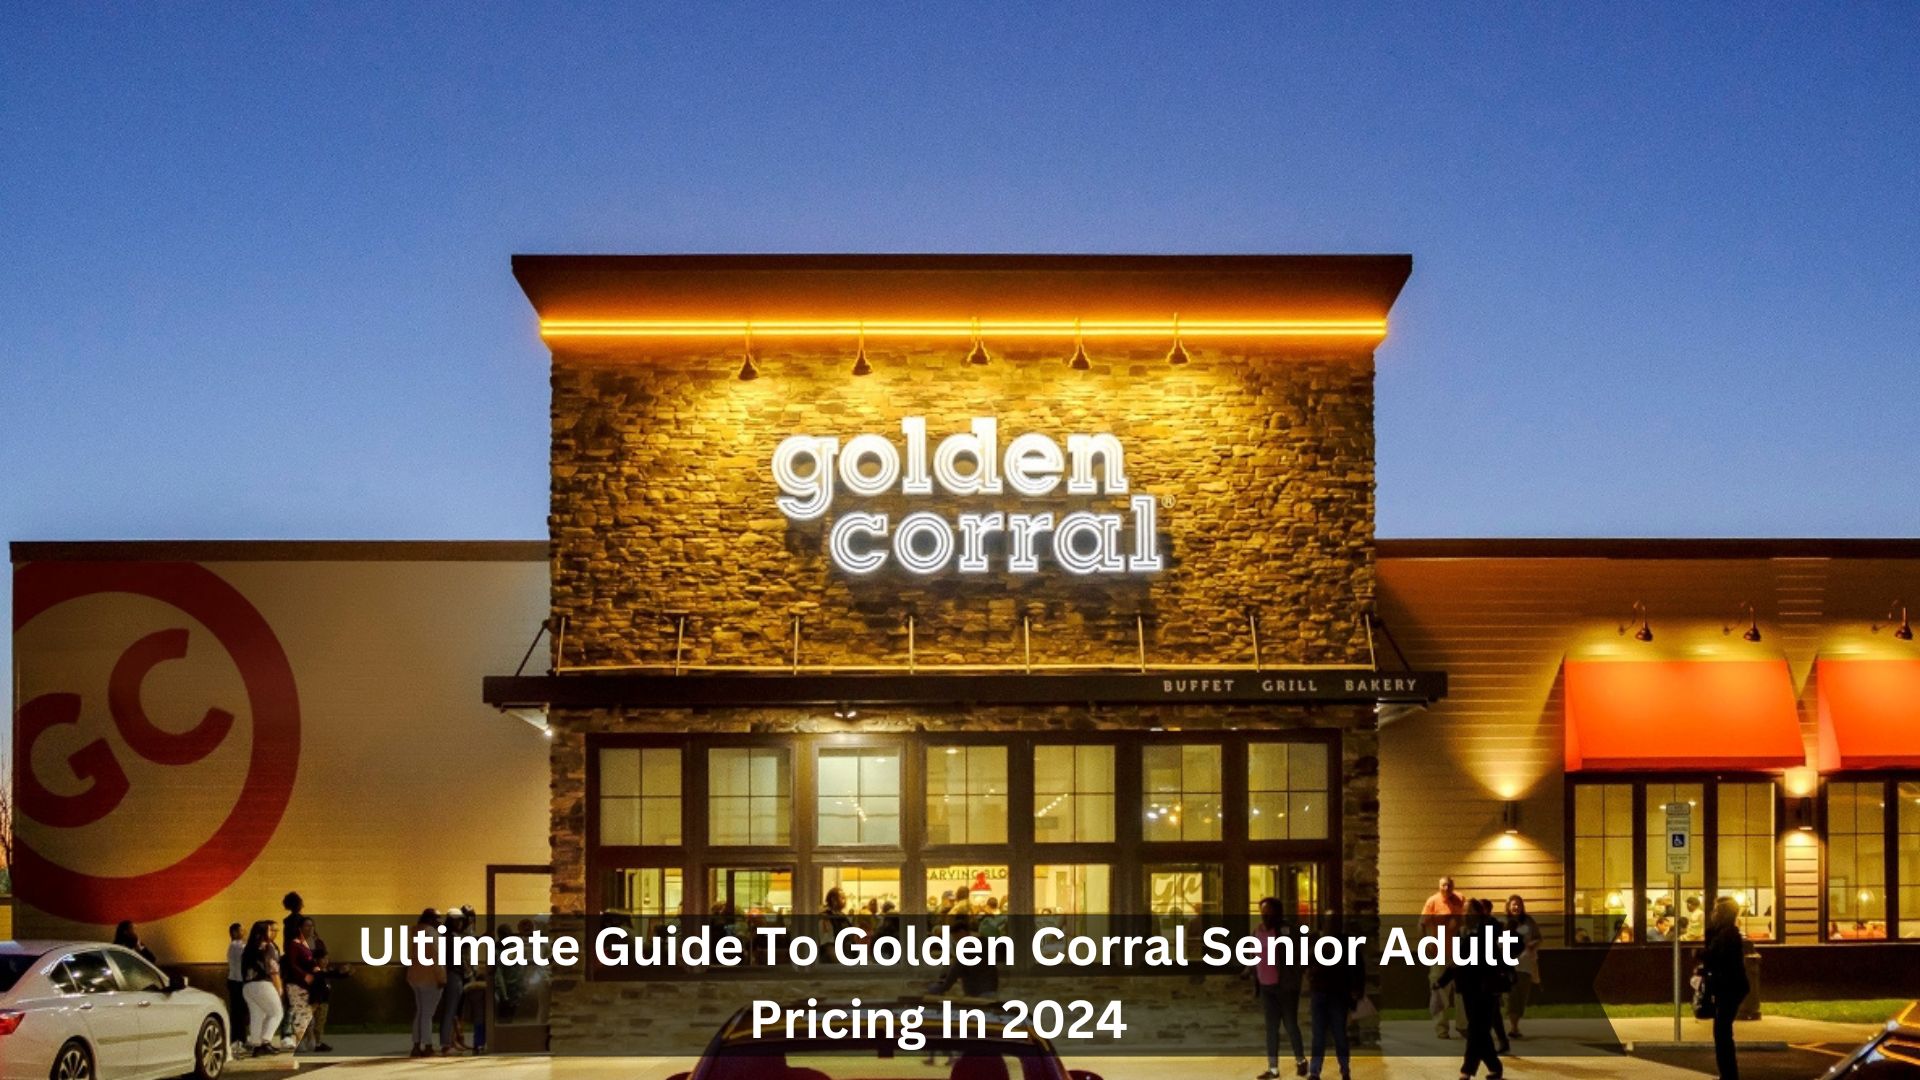 Ultimate-Guide-To-Golden-Corral-Senior-Adult-Pricing-In-2024